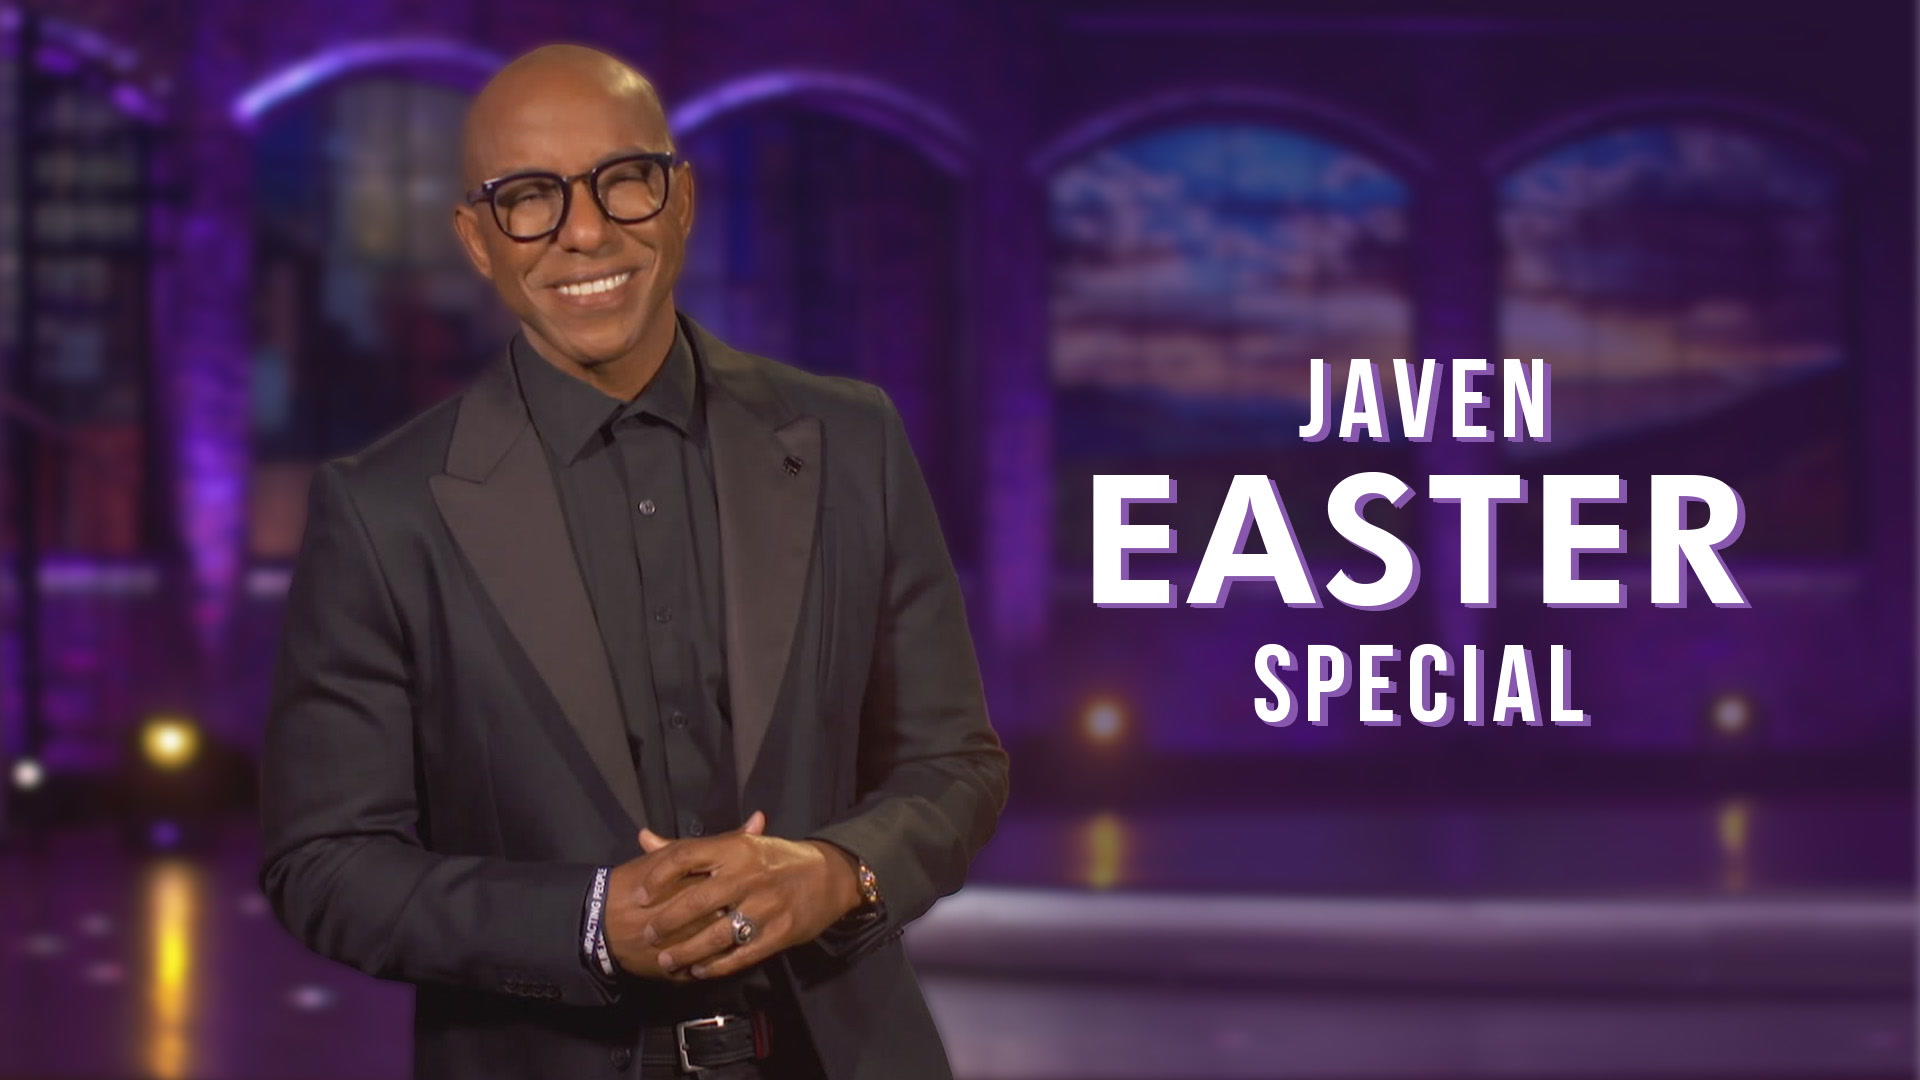 javen_easter_special.jpeg